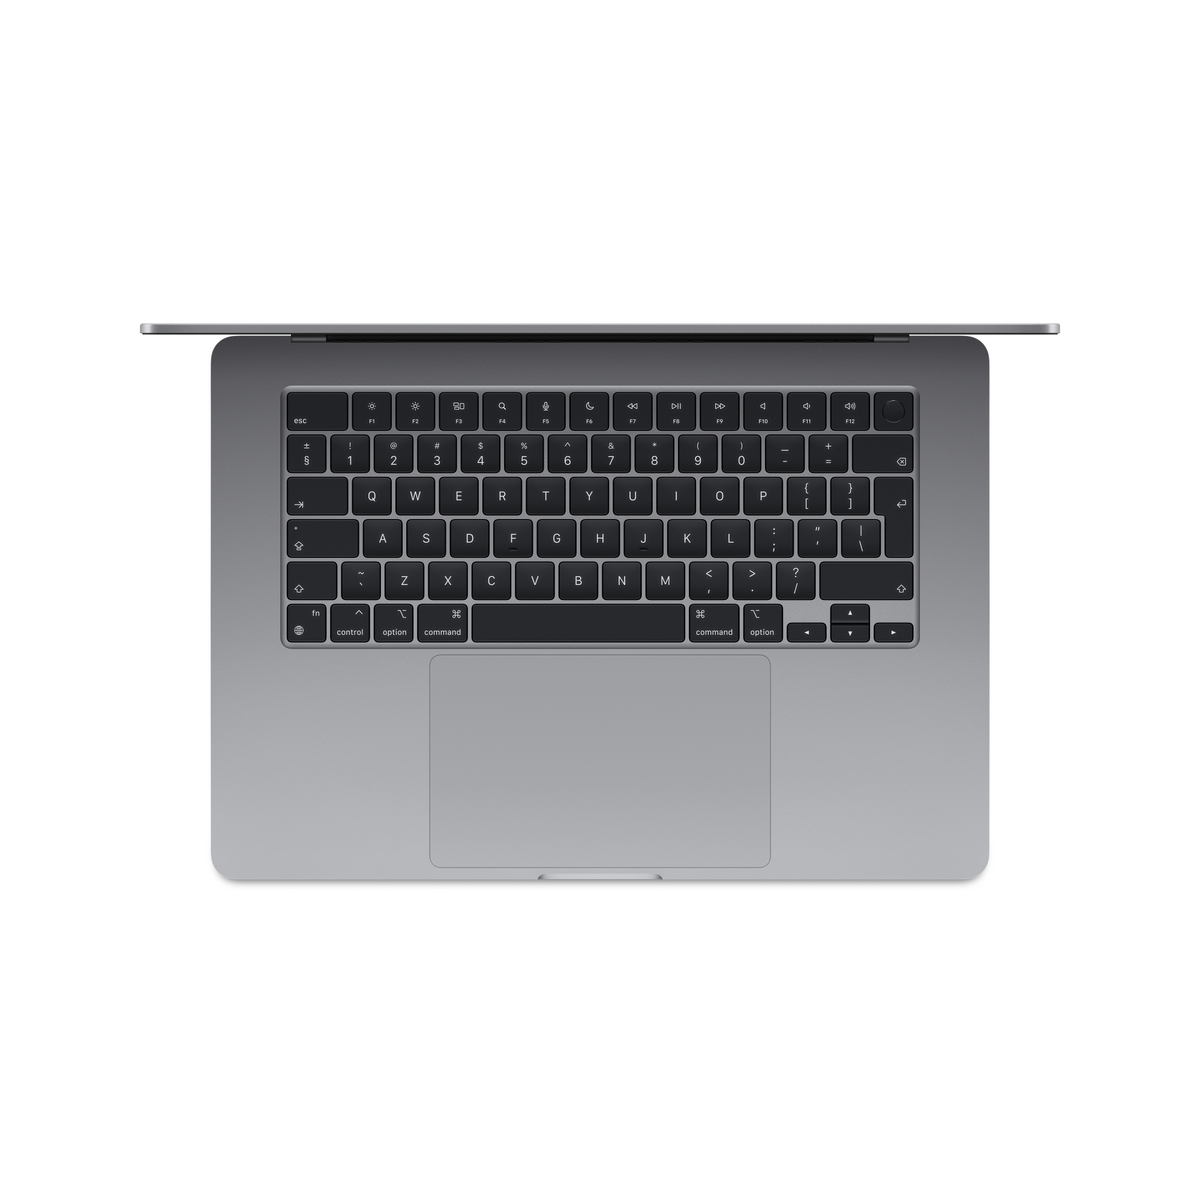 Apple MacBook Air, 15 inches, 8 GB RAM, 256 GB SSD, Apple M3 chip with 8-core CPU and 10-core GPU, macOS, Arabic, Space Grey